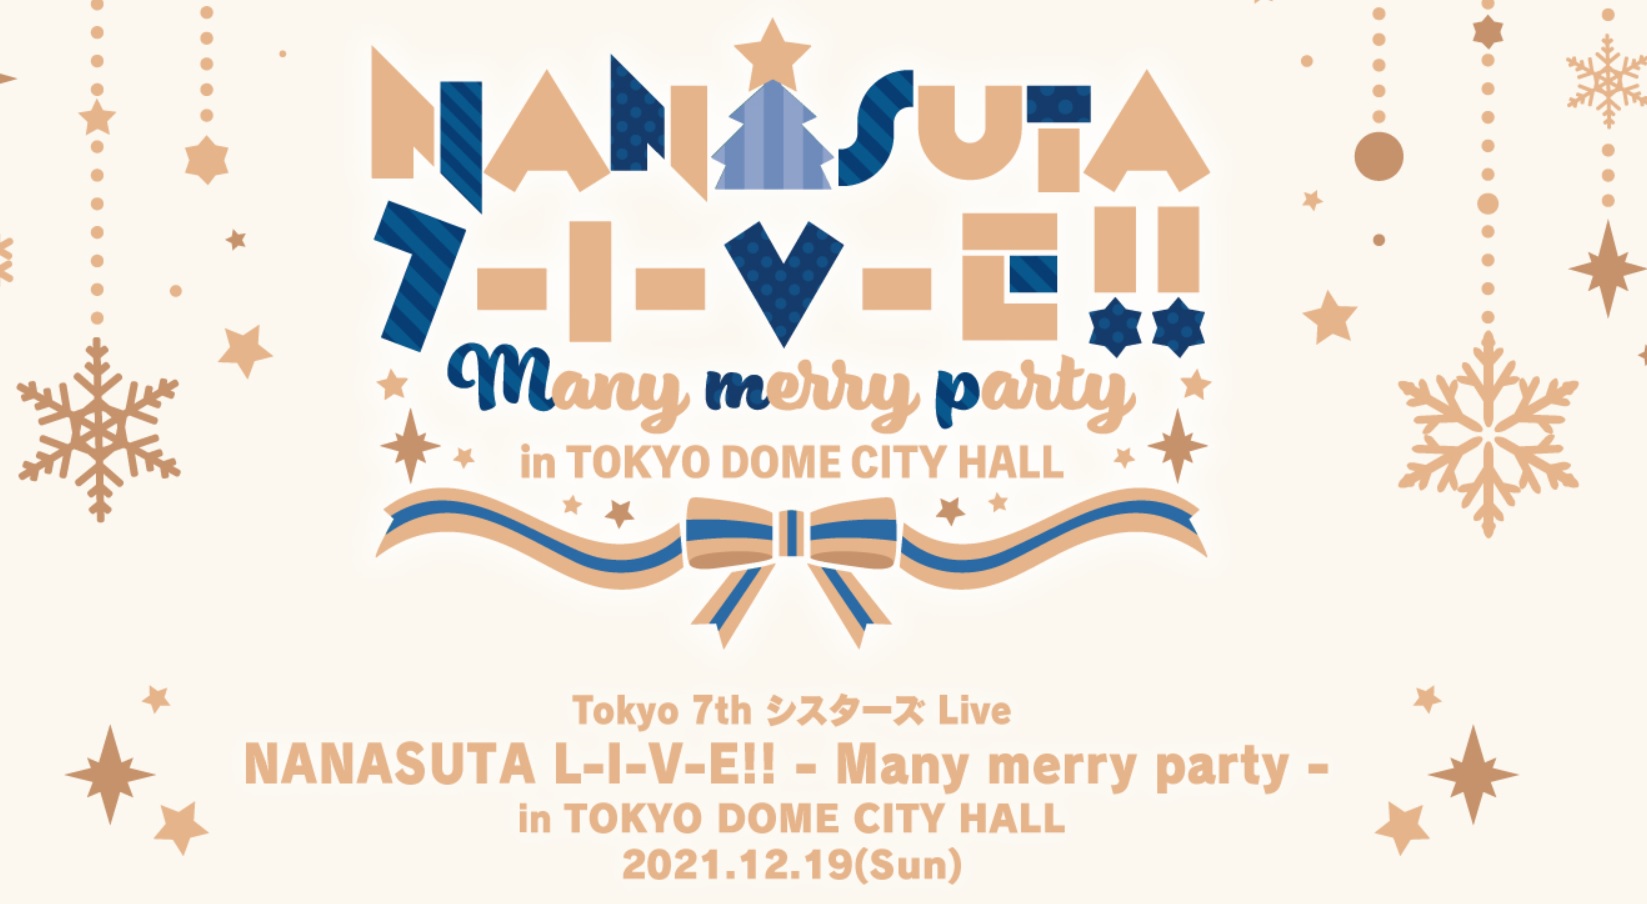 NANASUTA L-I-V-E!! - Many merry party -in TOKYO DOME CITY HALL 1F のオンキヨーブースに音アニ も参加いたします☆